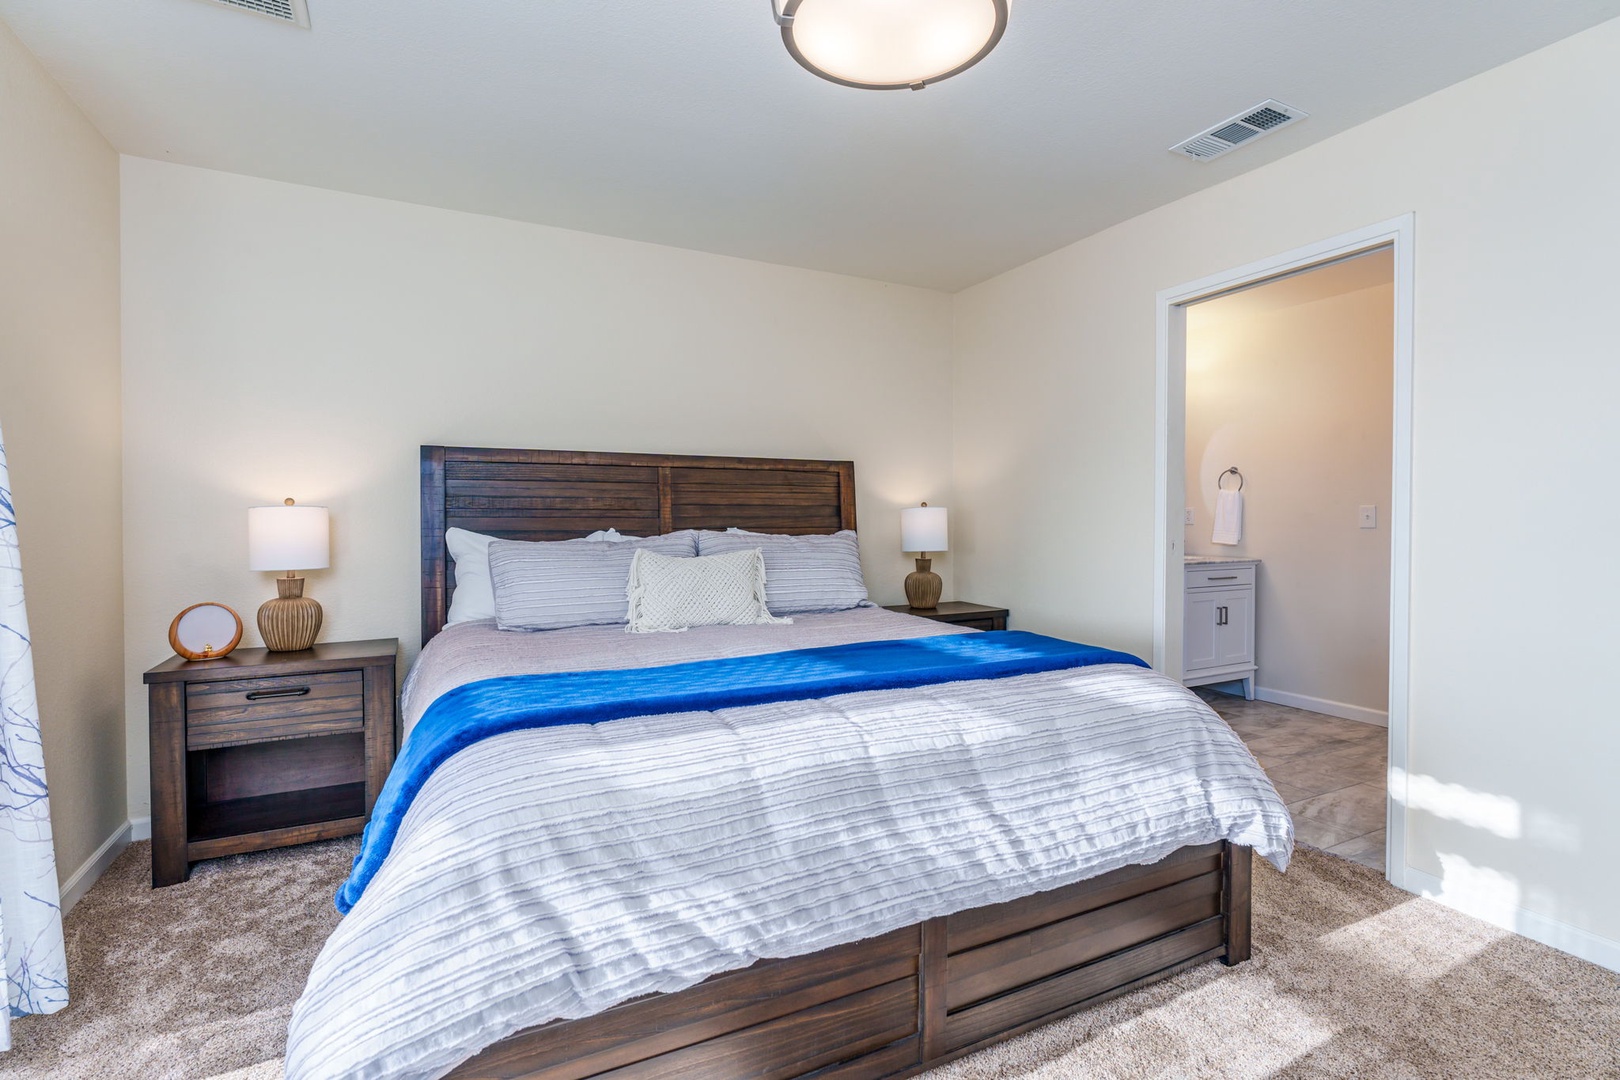 The Master Suite offers a King Bed, En Suite Bath, and access to the Back Deck